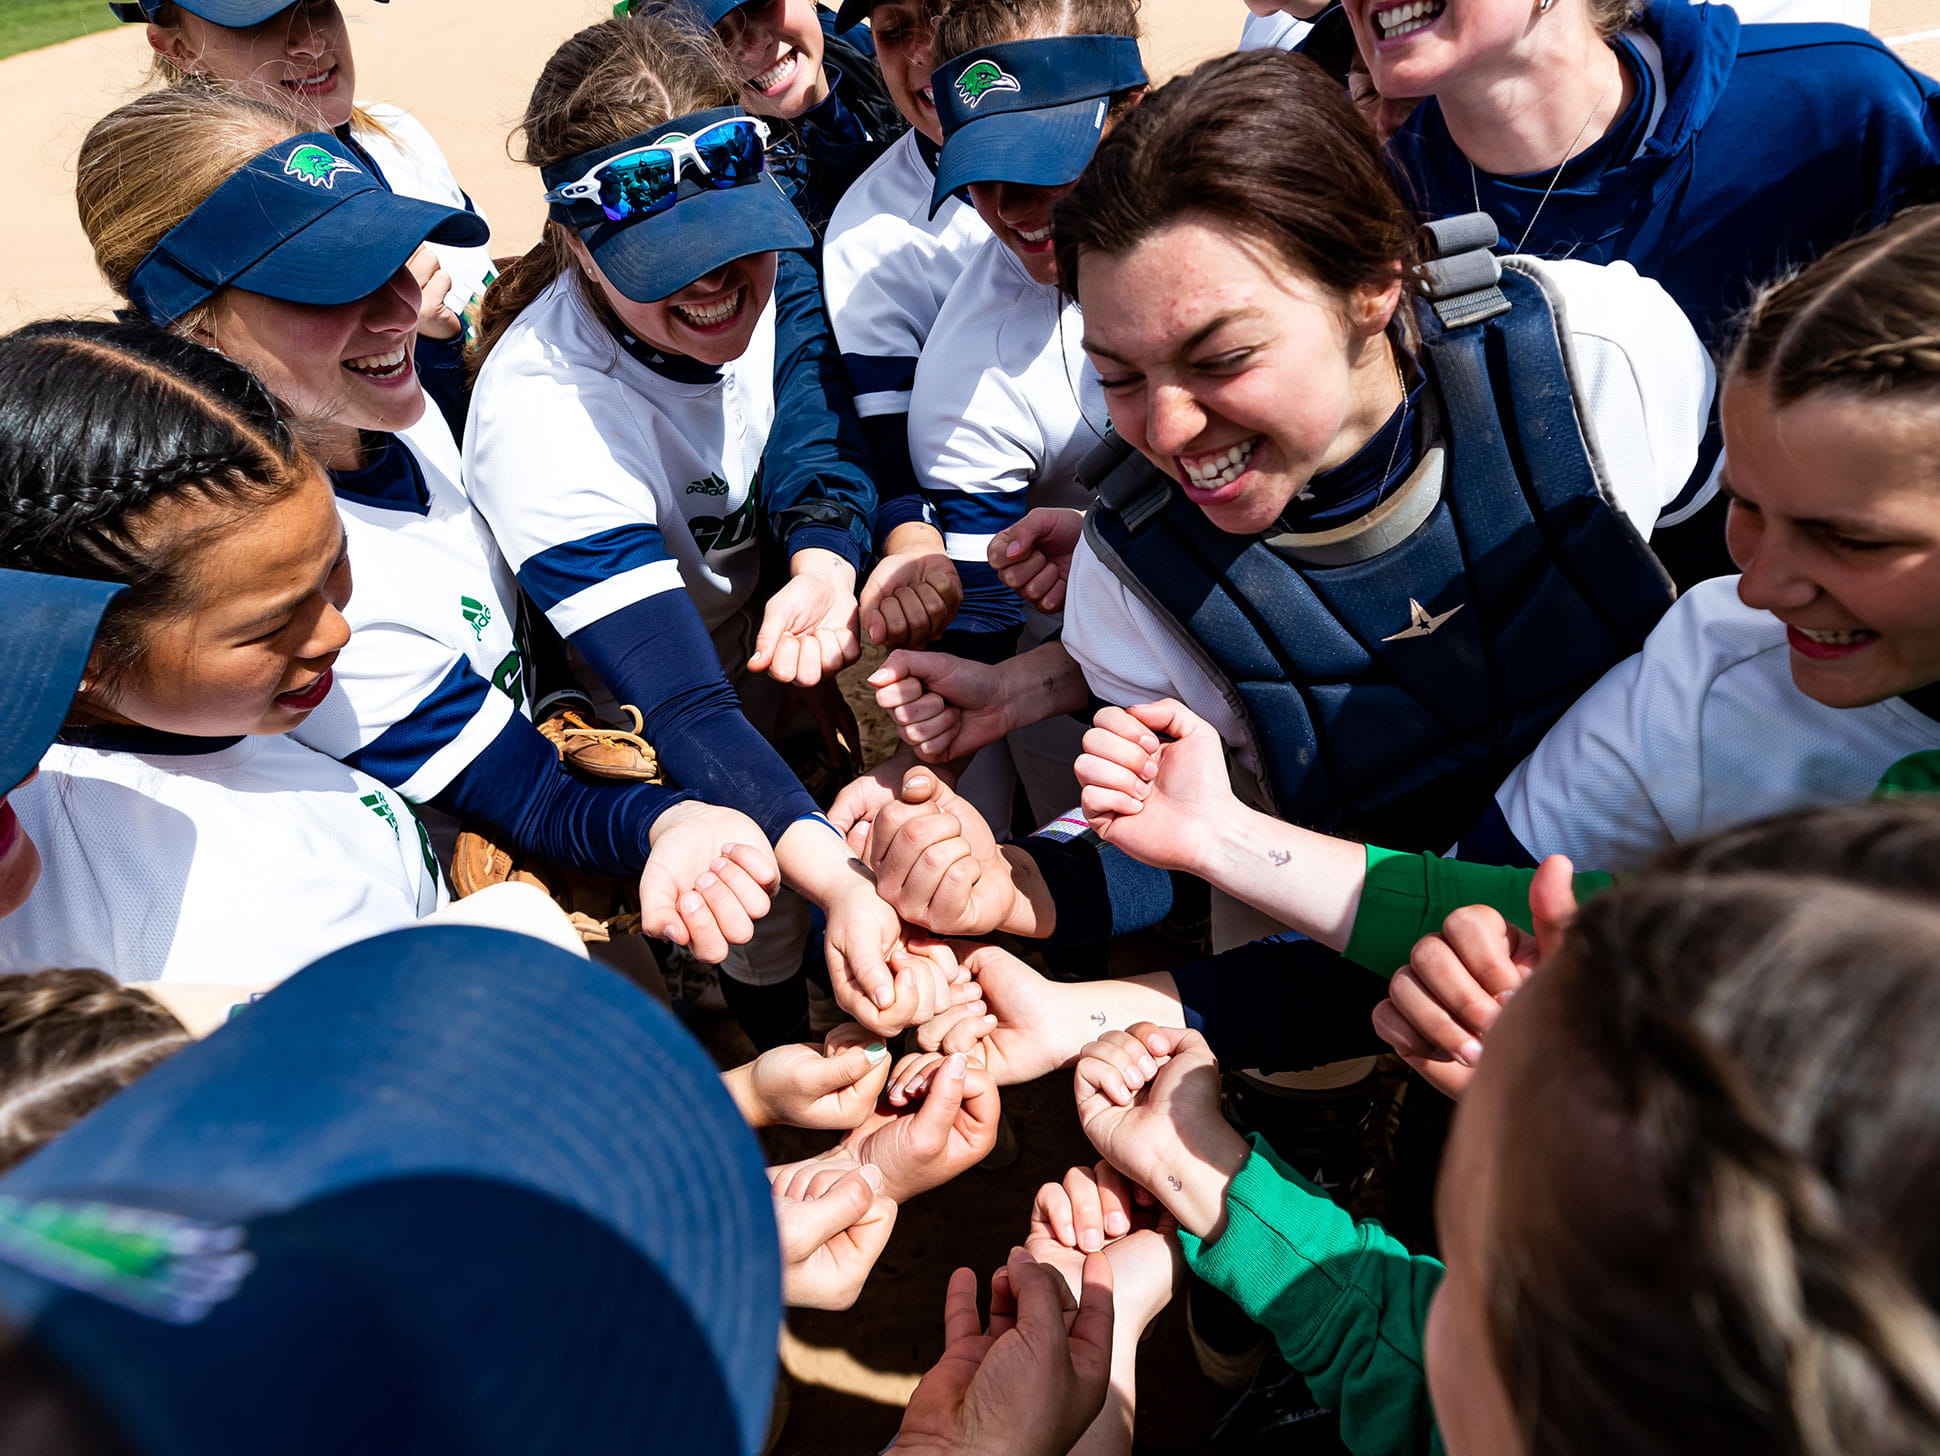 The softball team gets amped up before their Commonwealth Coast Conference Championship game against Western New England University.